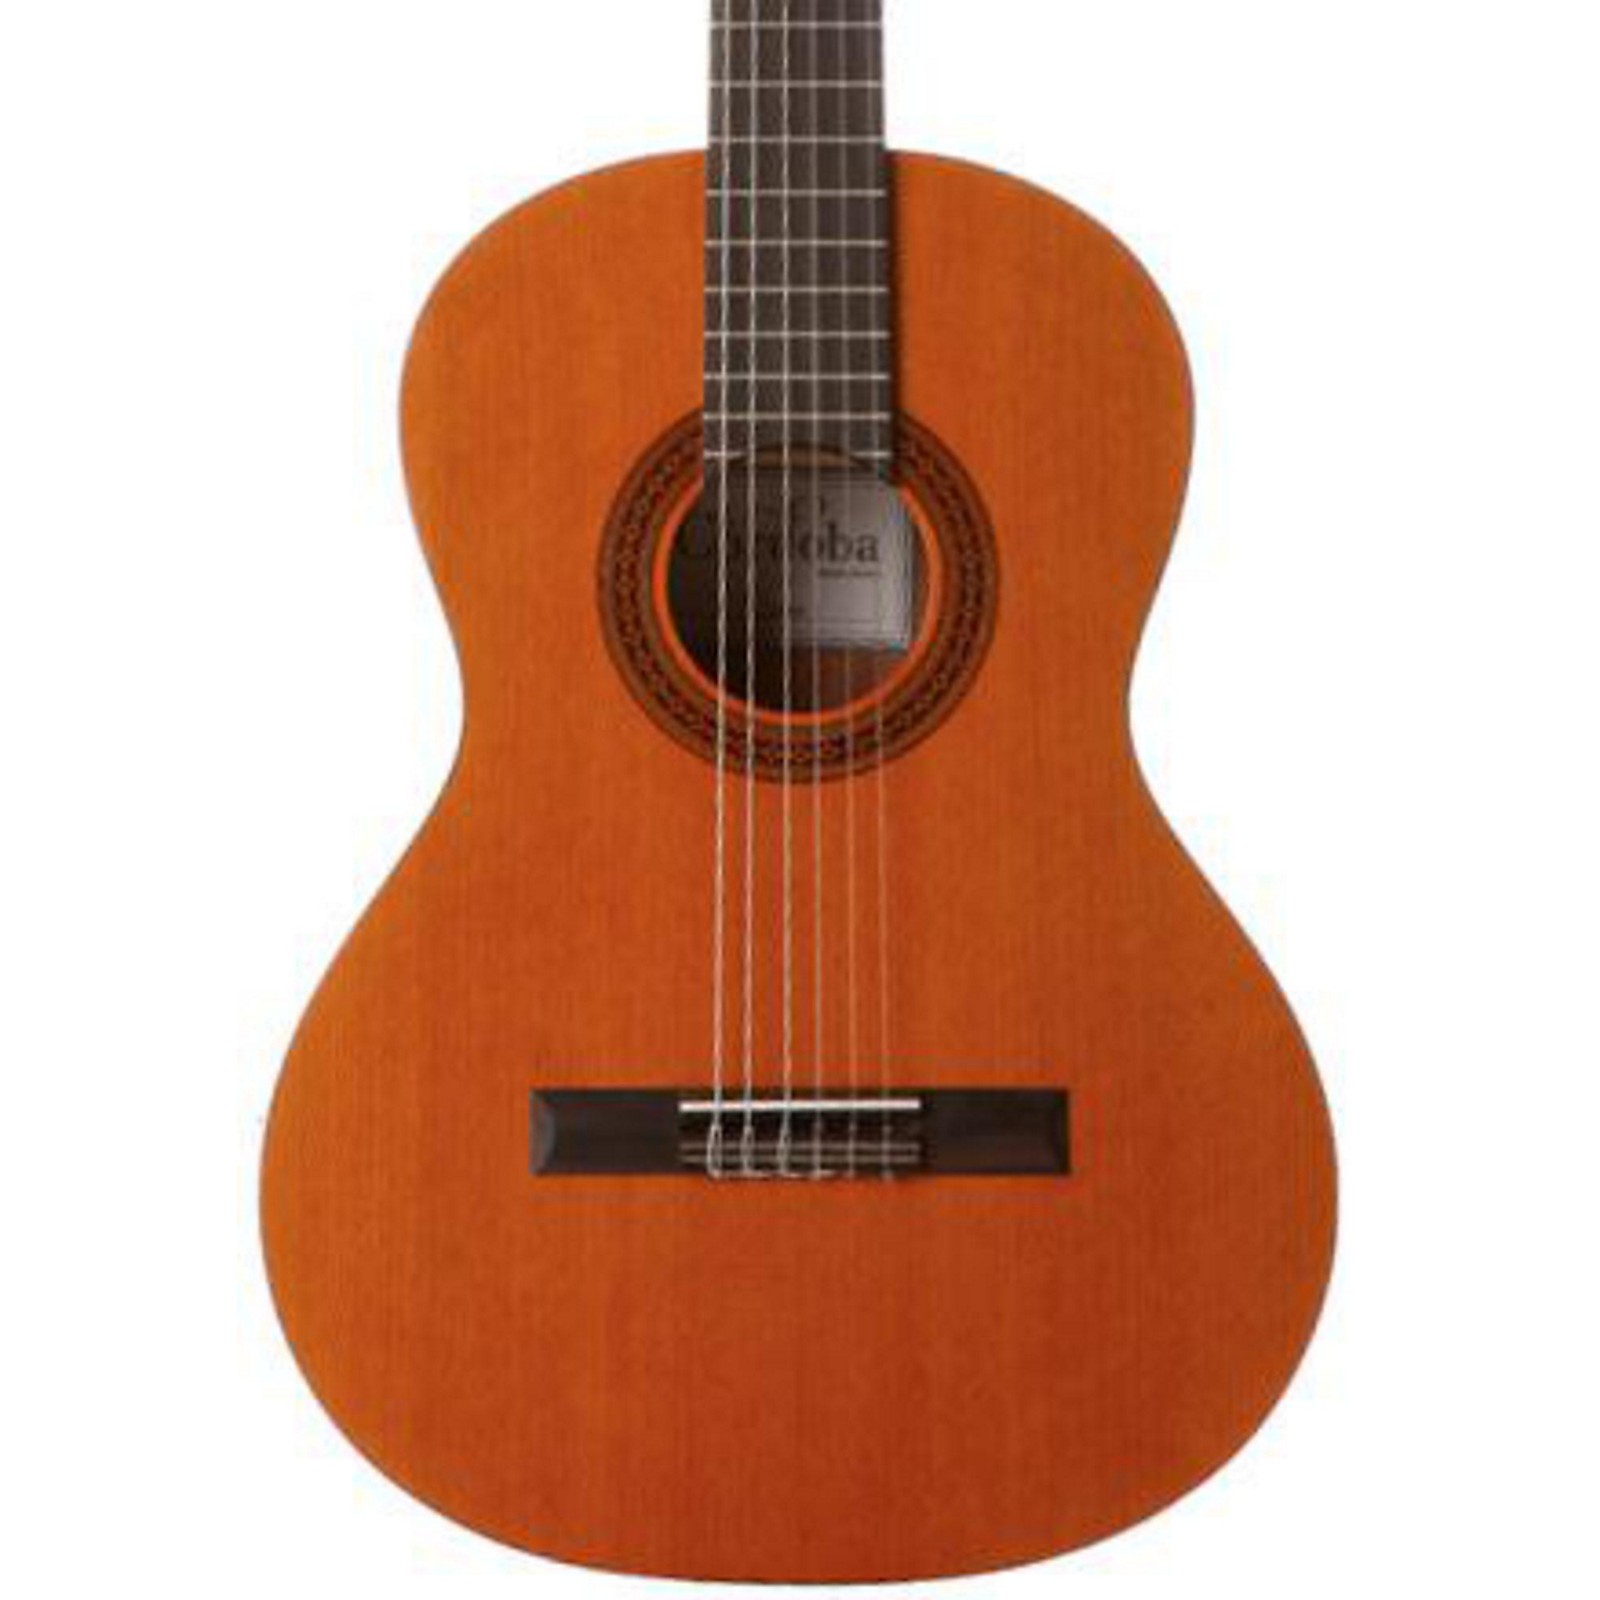 36 Inches 3/4 Size Nylon-string Classical Electric Acoustic Guitar for Travel Beginners Students Kids Build-in Pickup Kit Set